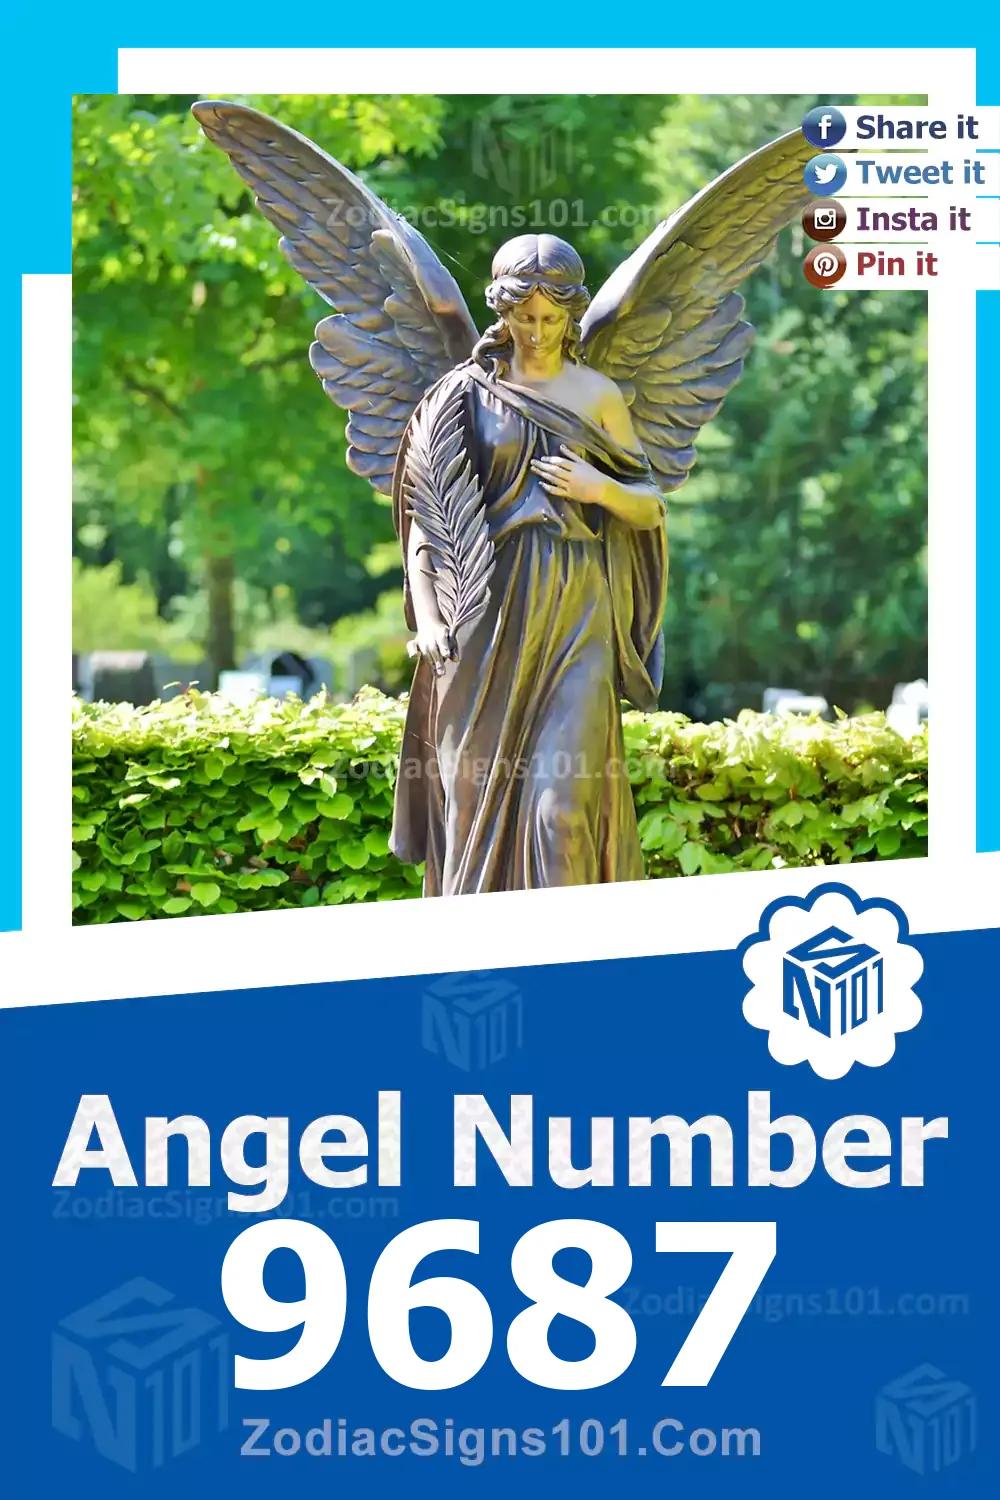 9687 Angel Number Meaning